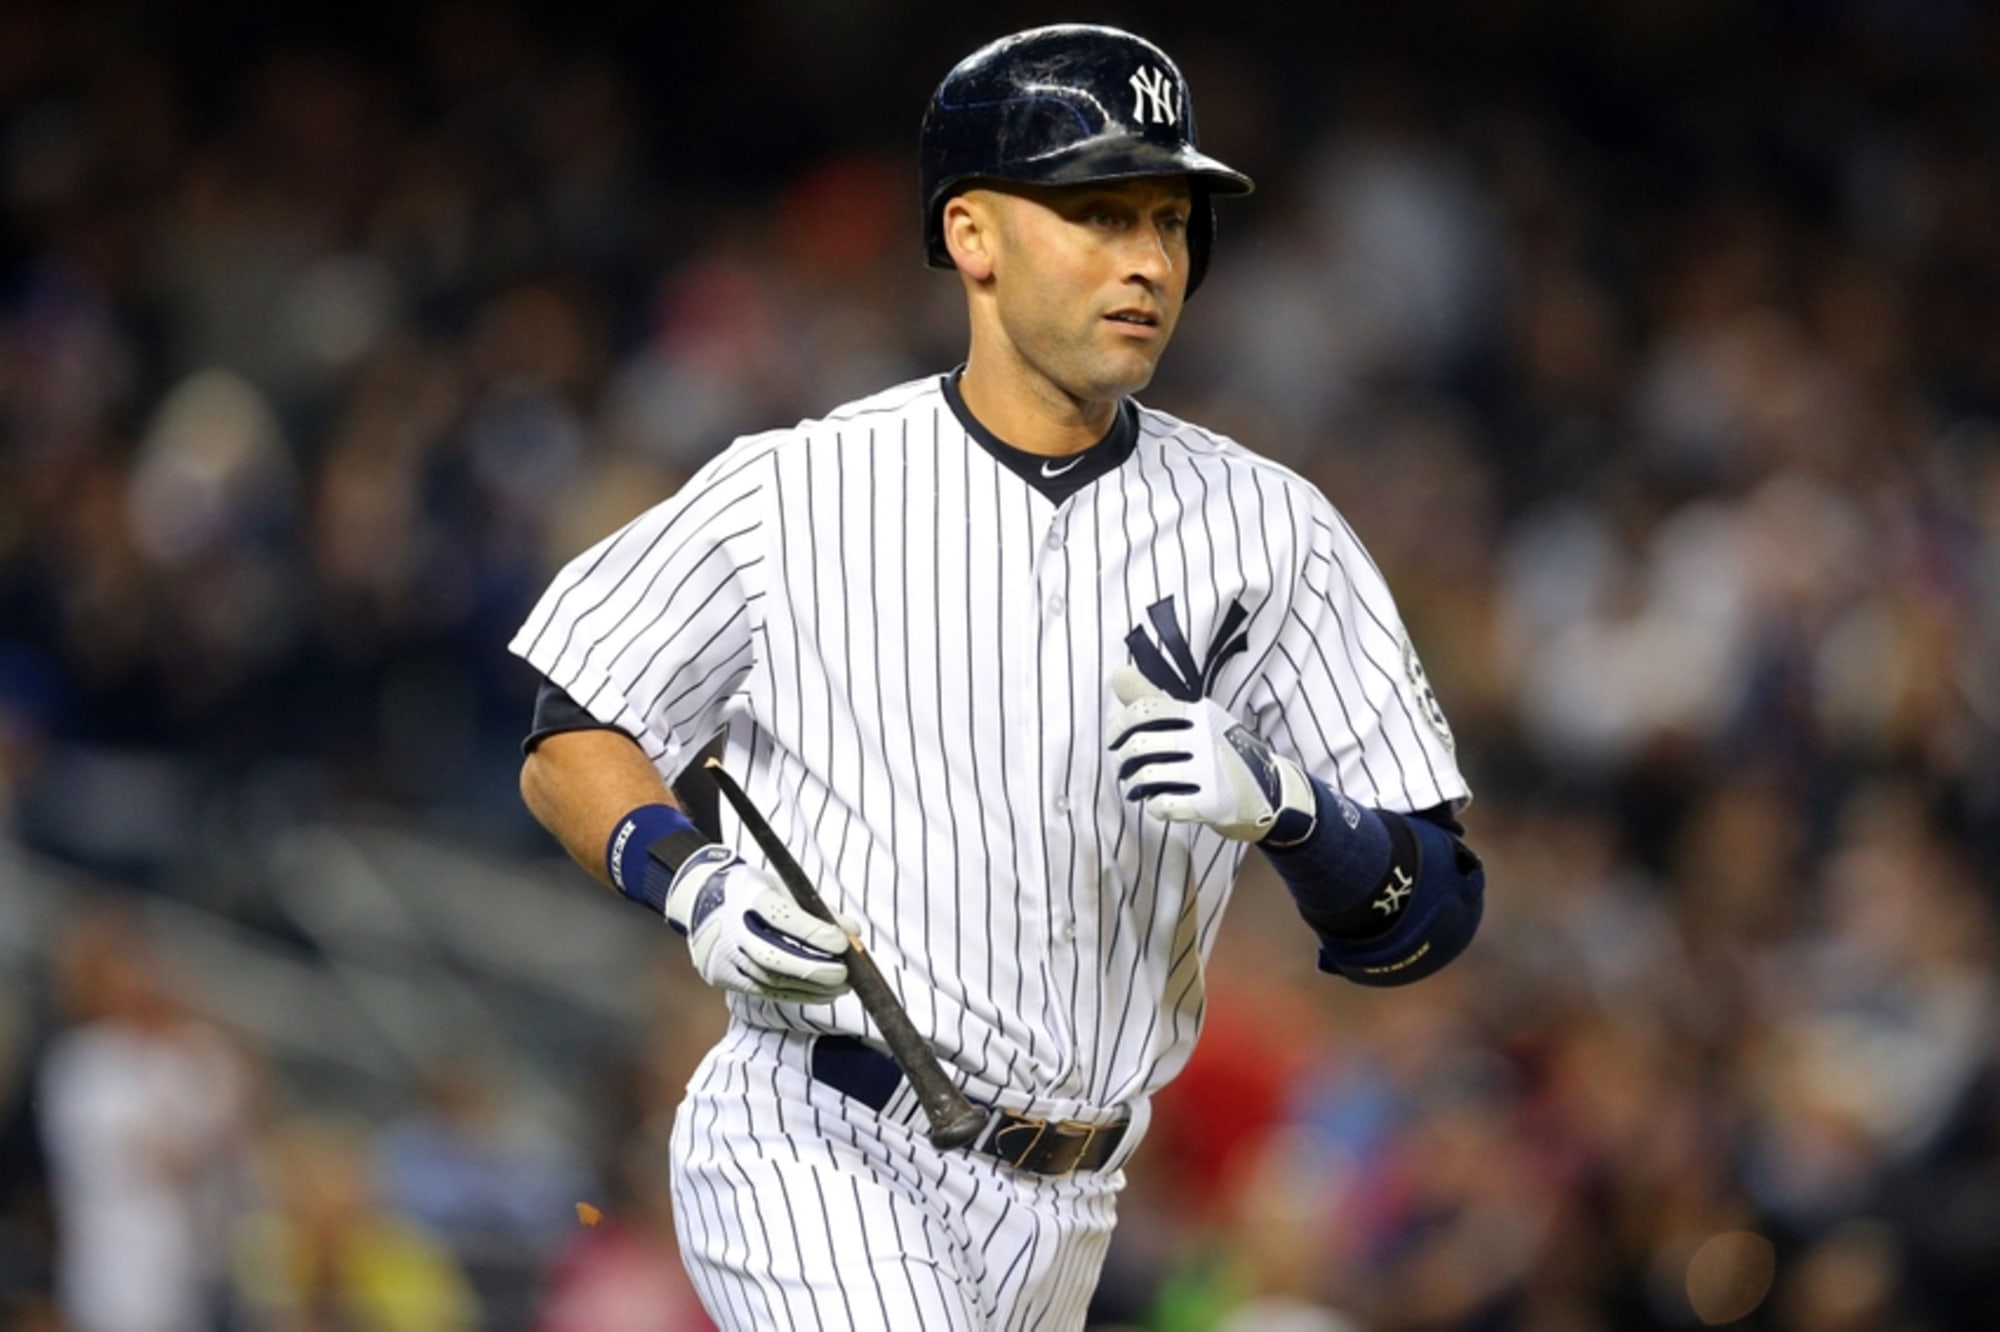 Derek Jeter: An exceptional and overrated Hall of Famer